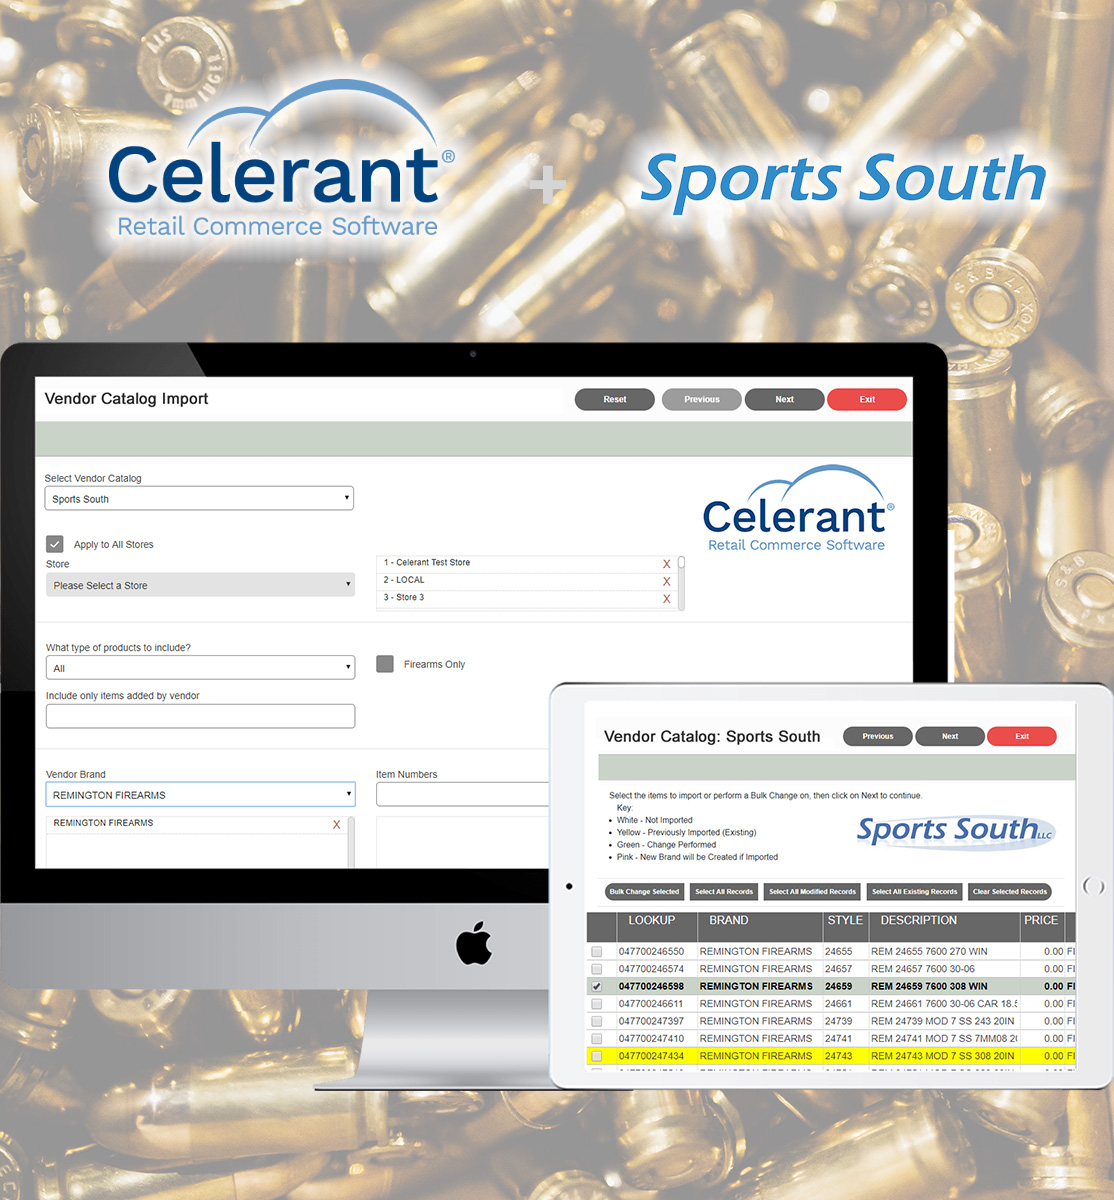 Celerant and Sports South